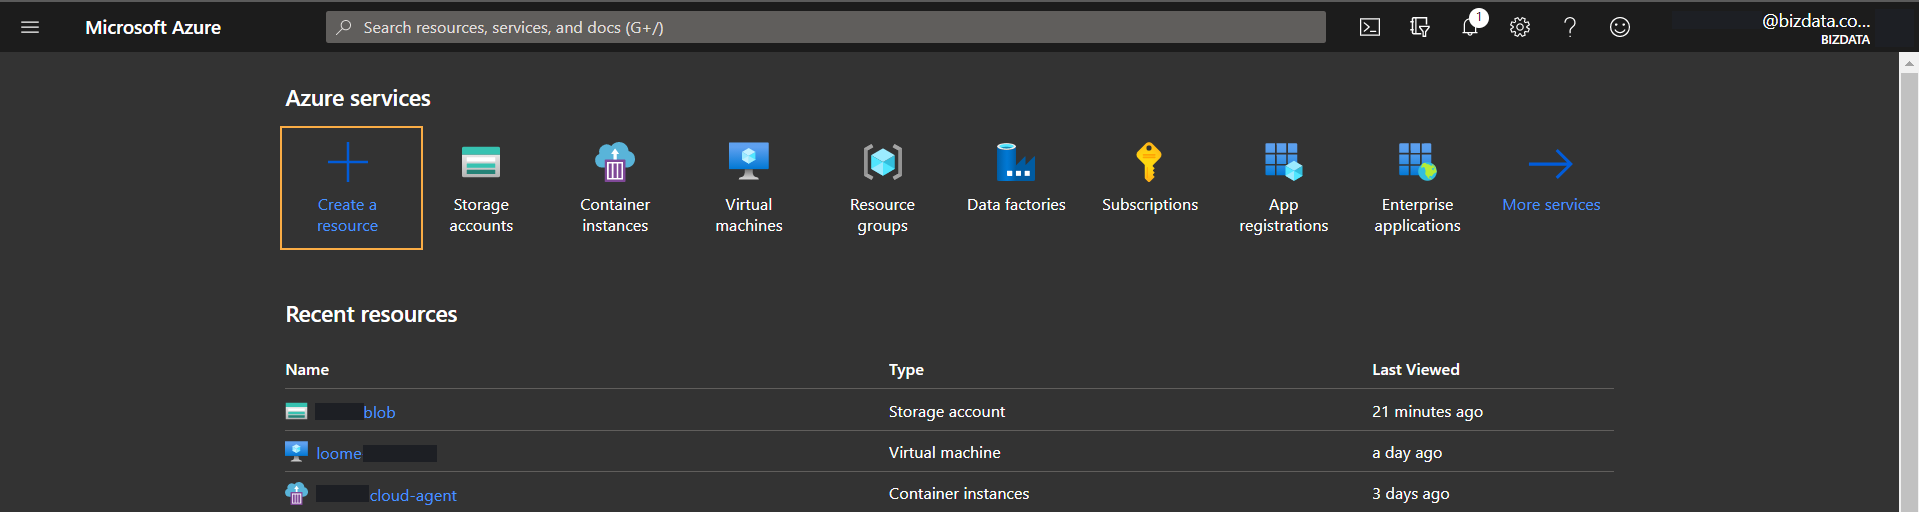 create a resource button on Azure